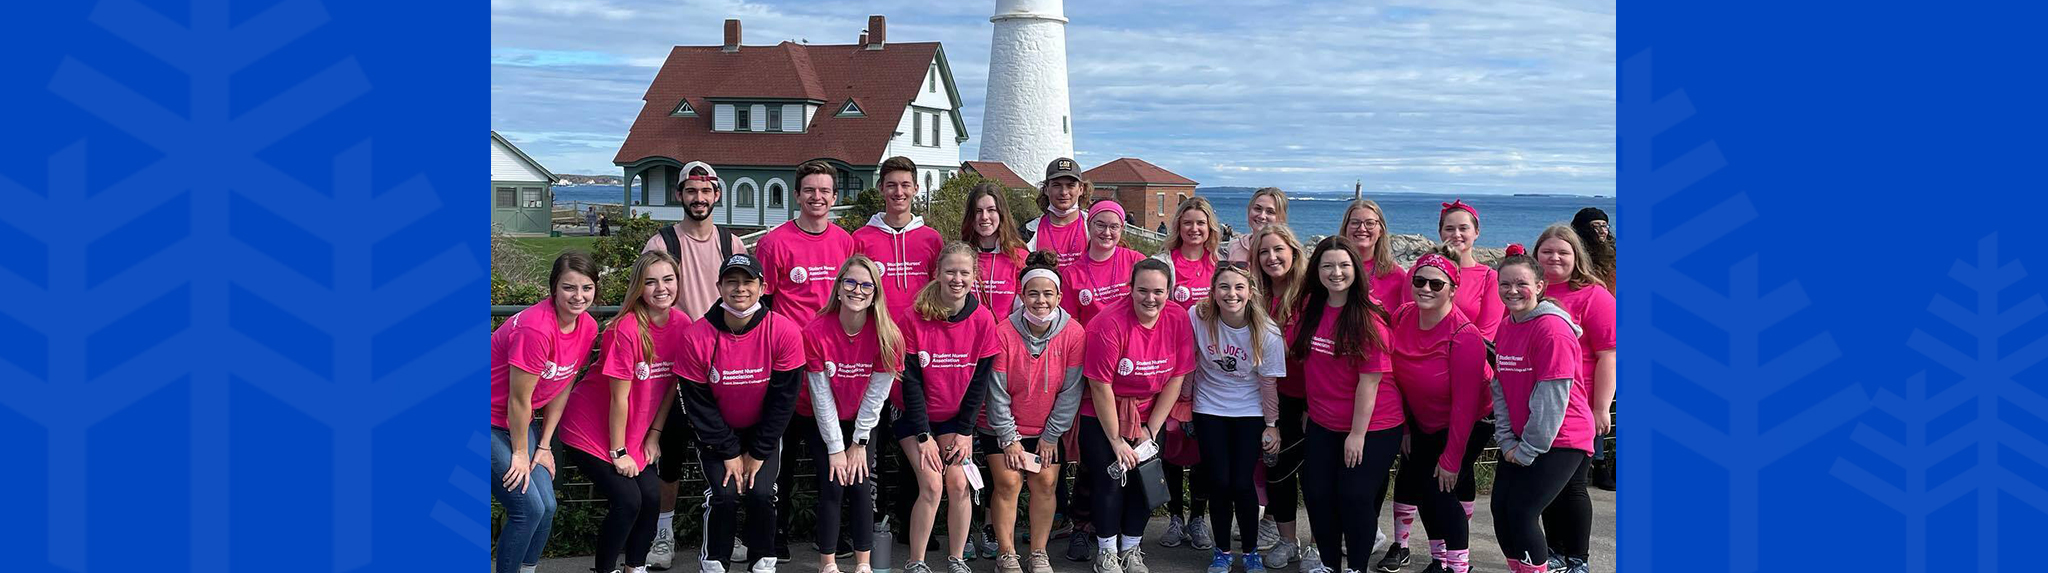 SNA group shot from 2021 American Cancer Breast Cancer walk